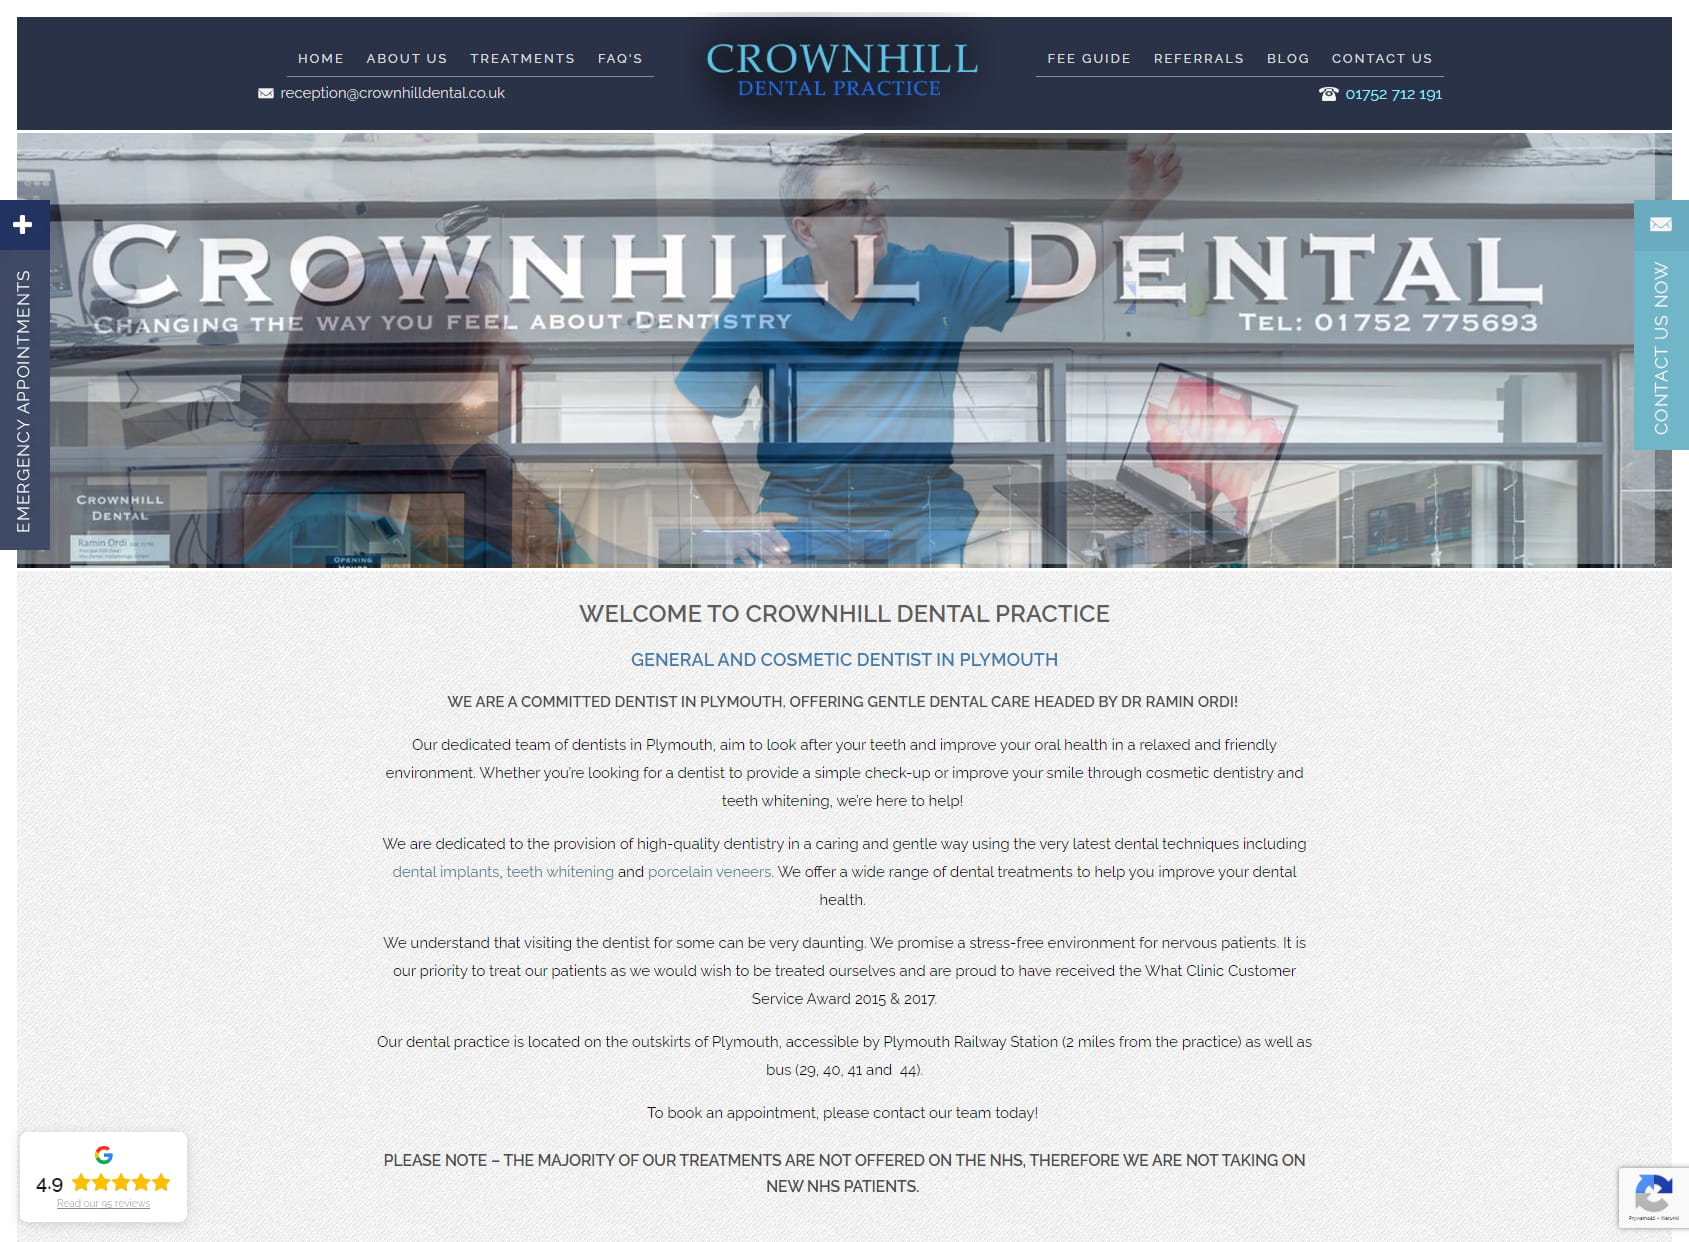 Crownhill Dental Practice - Plymouth